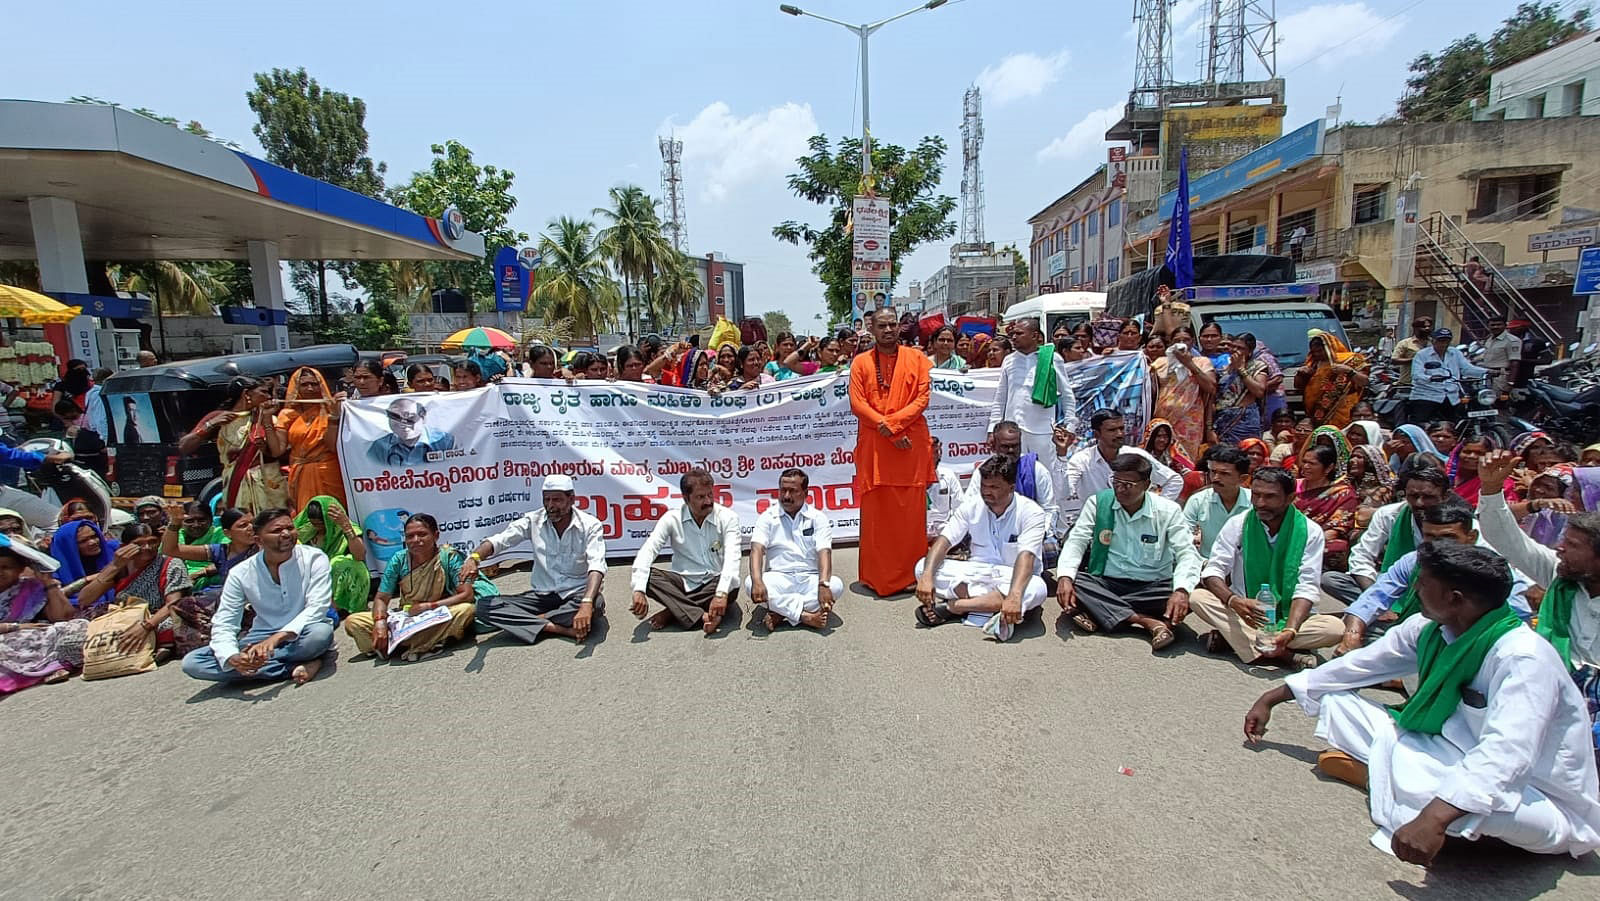 Based on officers’ assurance that a meeting would be facilitated with Bommai during his visit to Shiggaon on April 28 for action, the women called off their protest. Credit: DH Photo